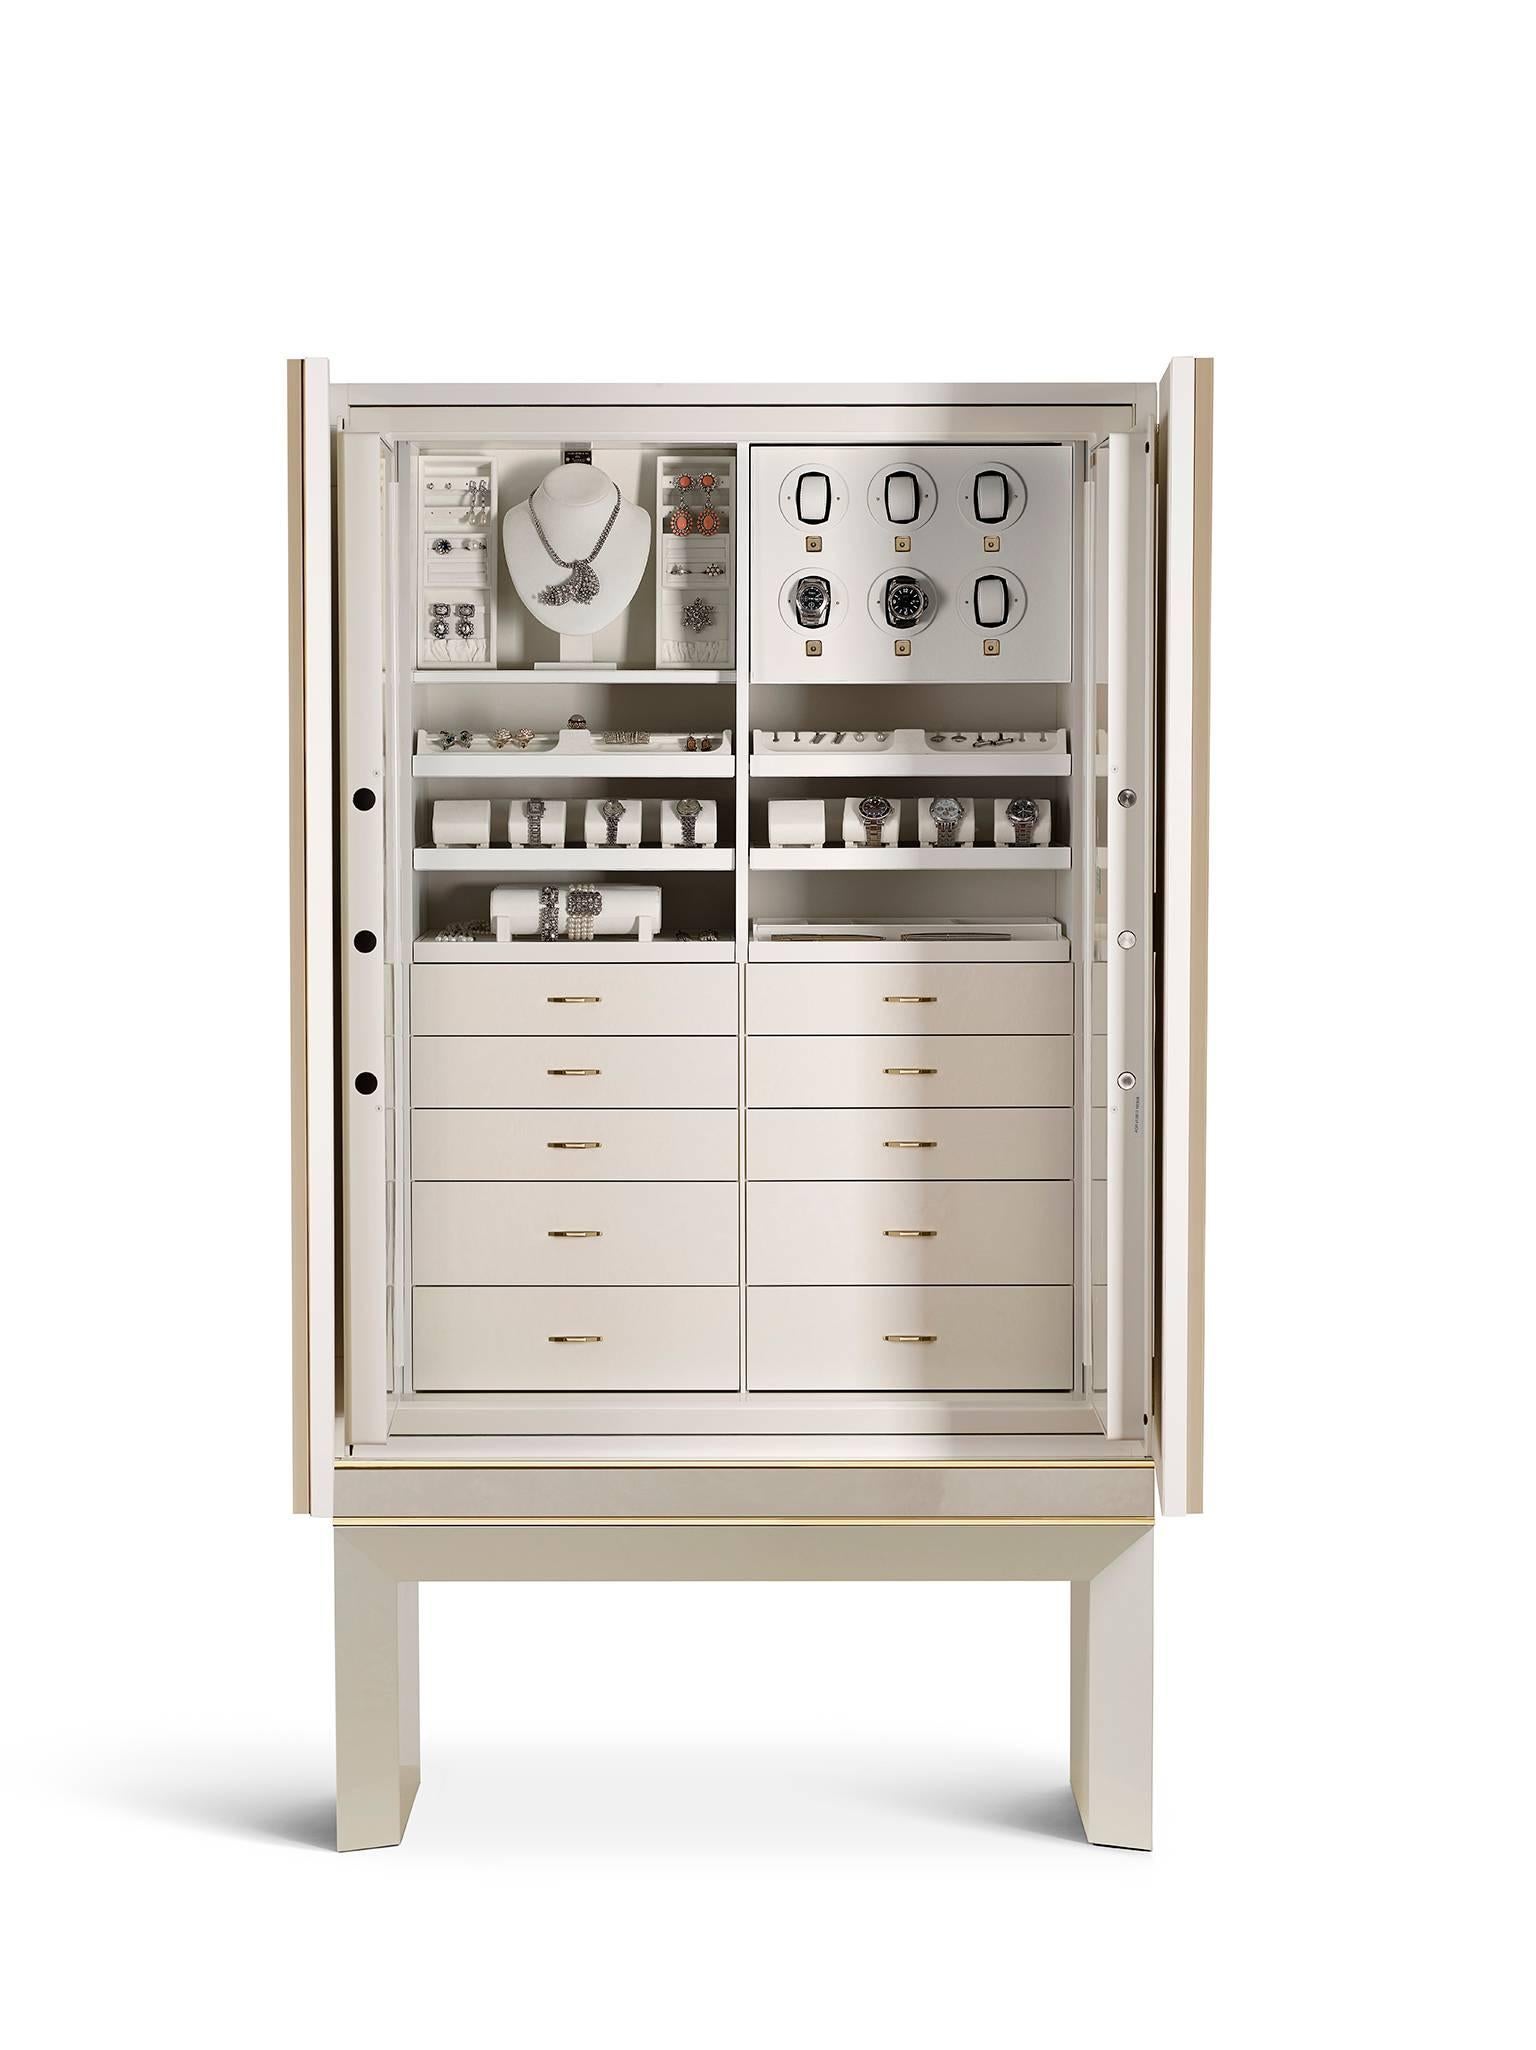 Armoured jewelry armoire in polished white bird’s-eye maple and 24-karat gold hardware. Inside, safe with biometric opening device. Drawers and pull-out trays lined for jewelry. Six watch winders made in Switzerland and secret compartment.